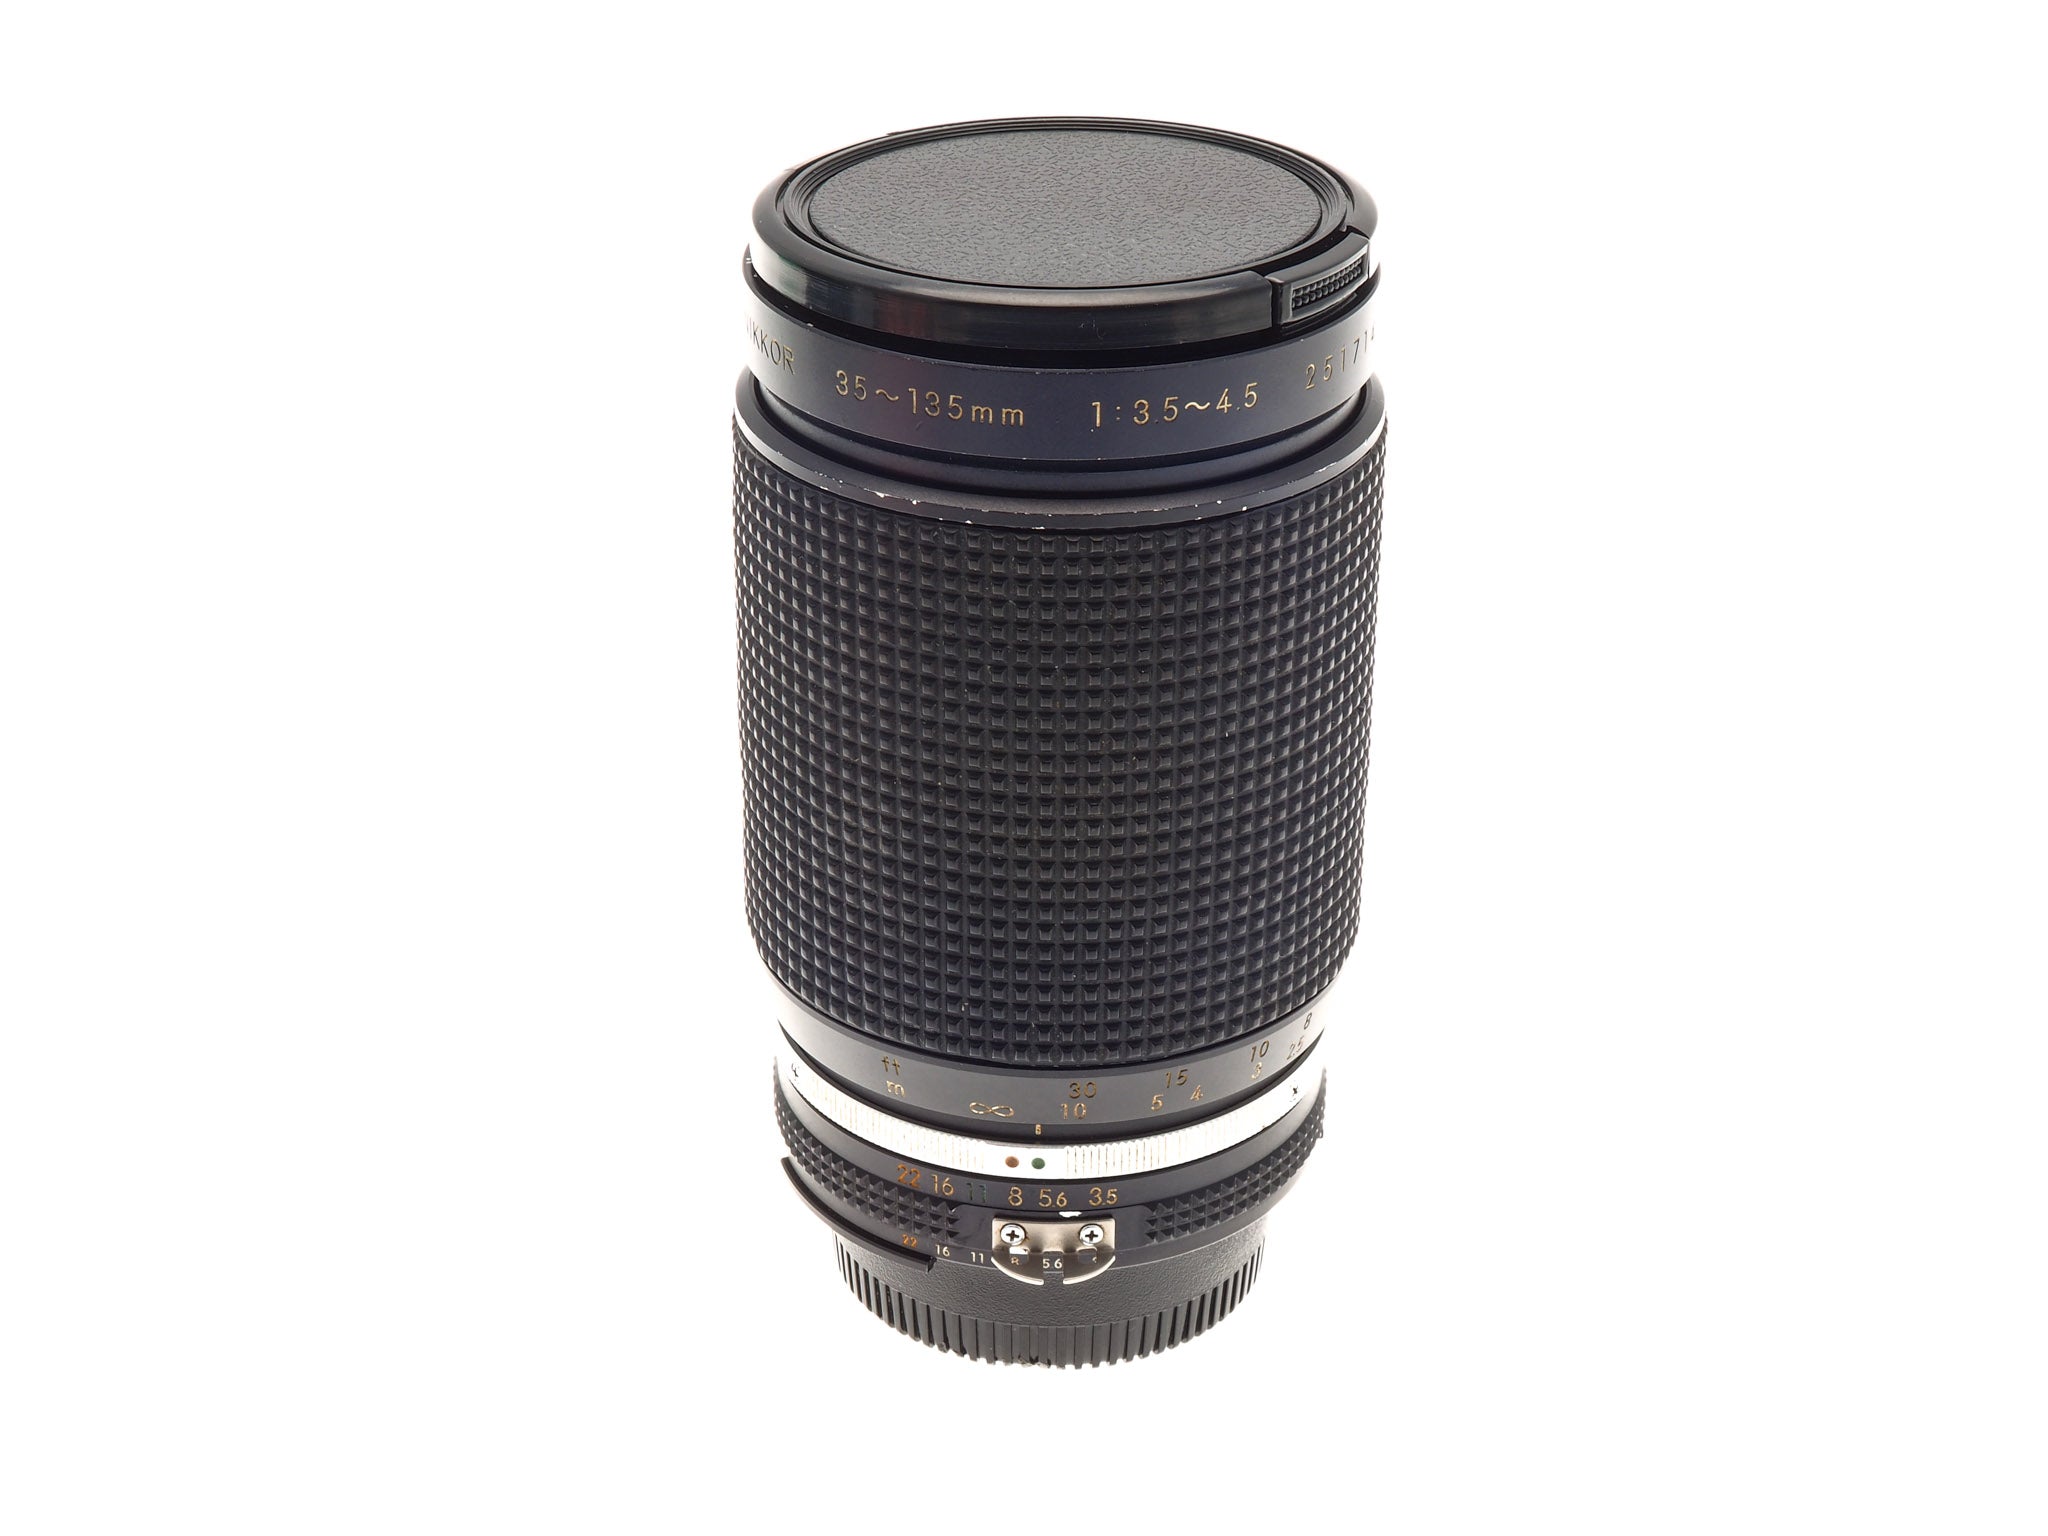 Nikon ニコン ニッコール Ai-s Zoom-Nikkor 35～135 mm f3.5～f4.5